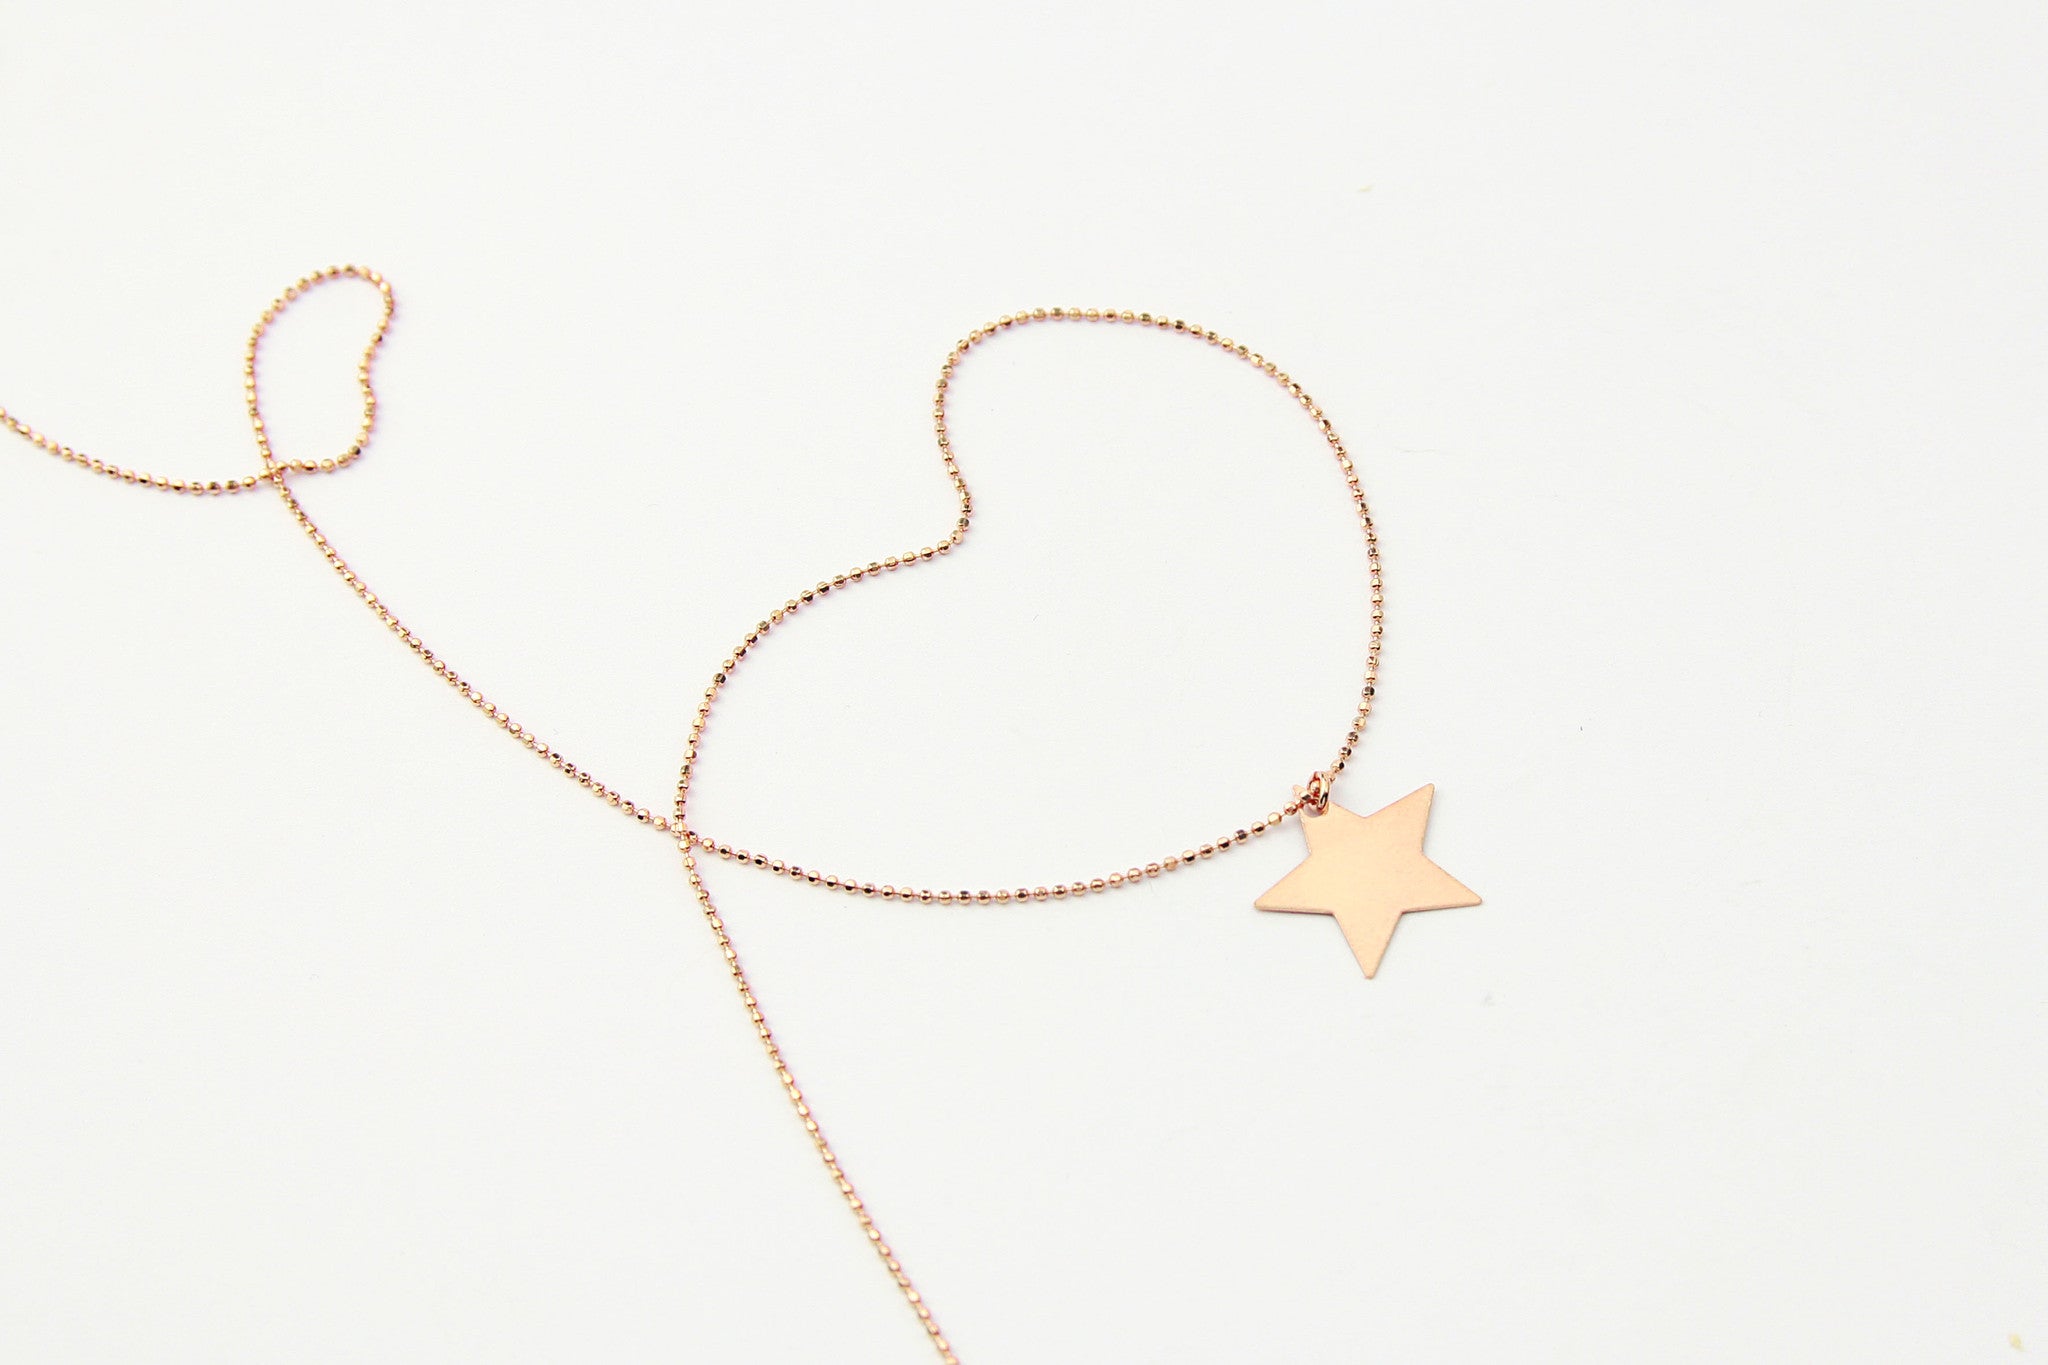 jewelberry  fine jewelry handmade with love fairtrade necklace kette plain star medium bead chain rose gold plated sterling silver